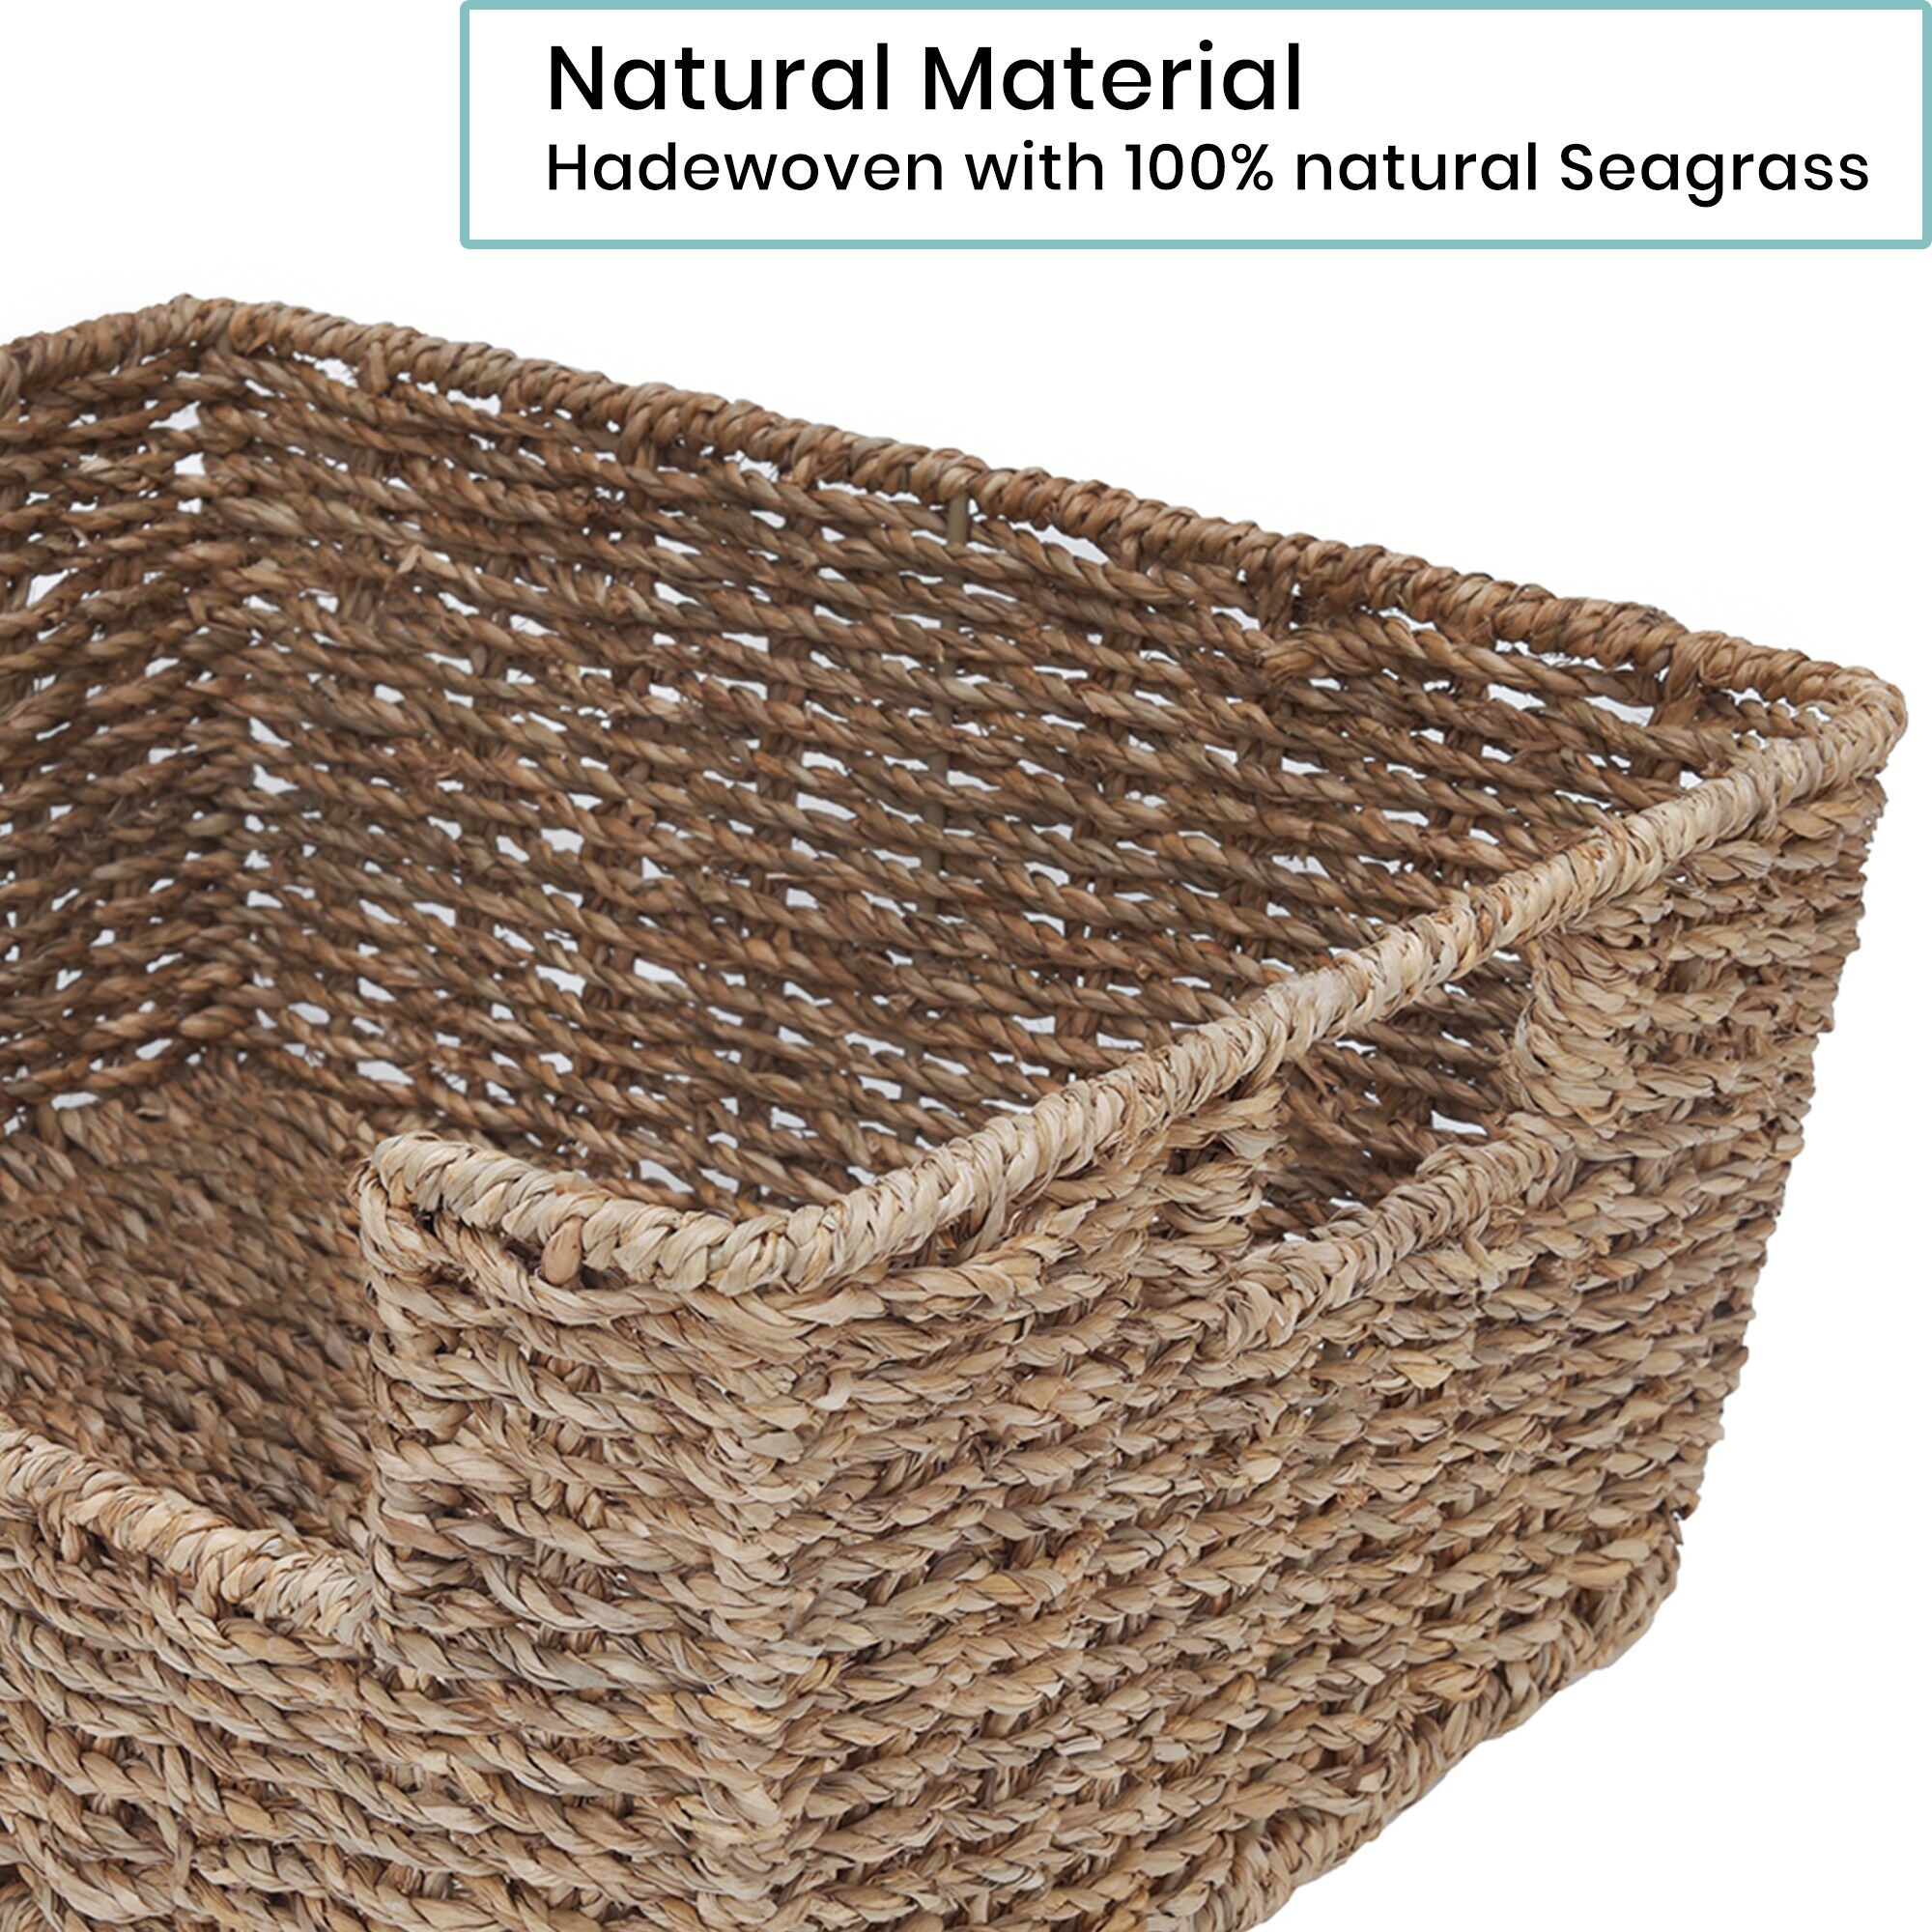 StorageWorks Small Wicker Baskets, Handwoven Baskets for Storage, Seagrass  Rattan Baskets with Wooden Handles, 2-Pack